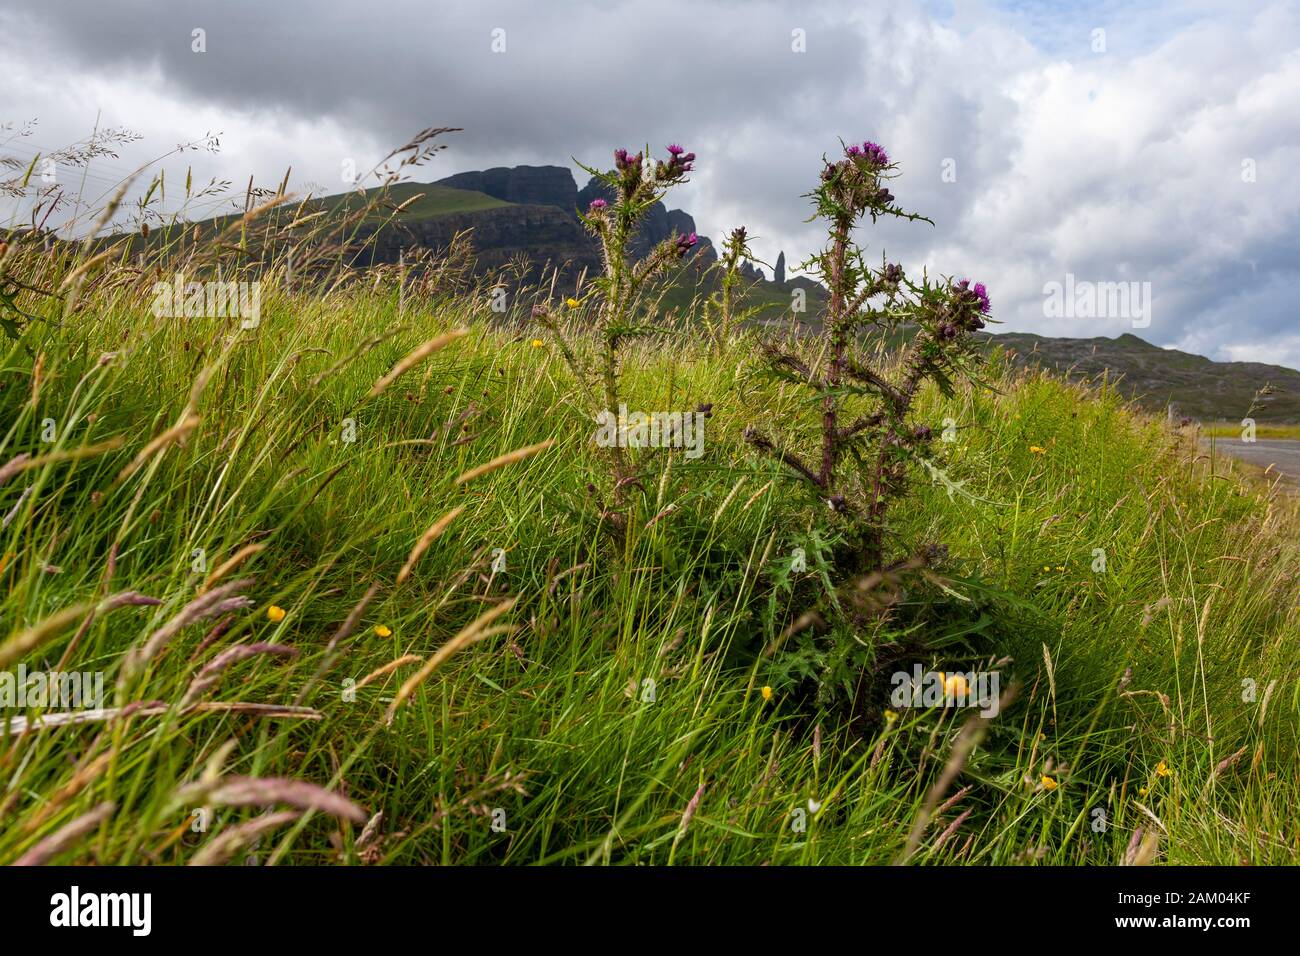 A purple thistle flower in a field of grass and grain with the Old Man of Storr visible in the background. Stock Photo